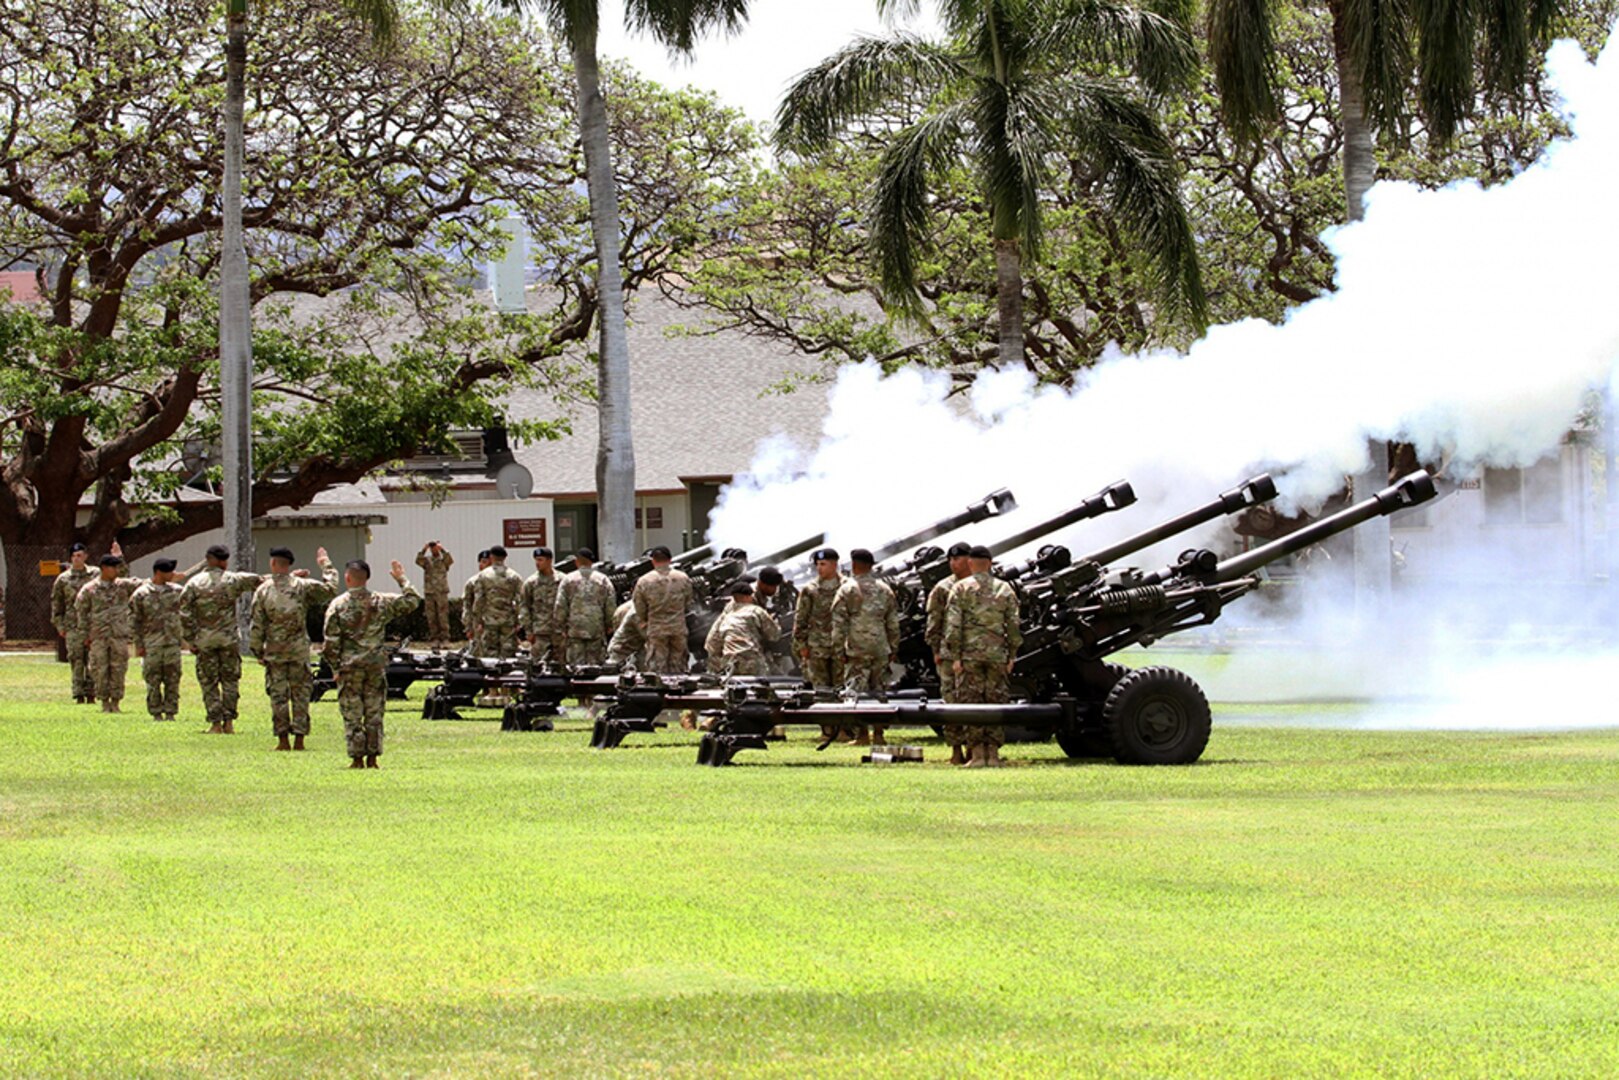 FORT SHAFTER, Hawaii (May 4, 2016) - Soldiers with 3rd Brigade, 7th Field Artillery, 25th Infantry Division Salute Battery, honor in-coming and out-going U.S. Army Pacific commanding generals with a gun salute during change of command ceremony between Gen. Vincent K. Brooks and Gen. Robert B. Brown. 